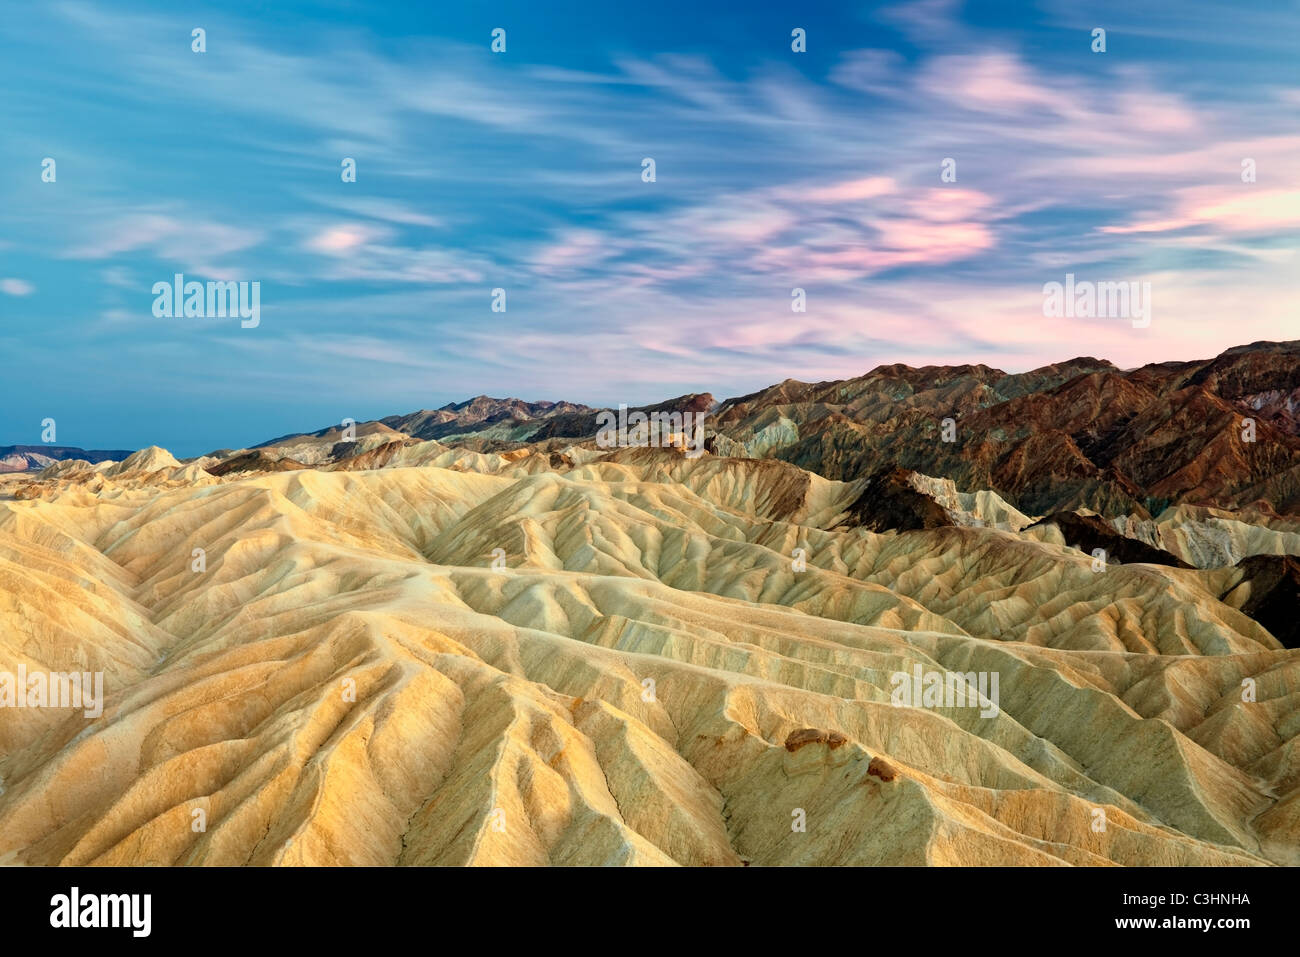 Sunset light over the colorful badlands of Golden Canyon in California's Death Valley National Park. Stock Photo